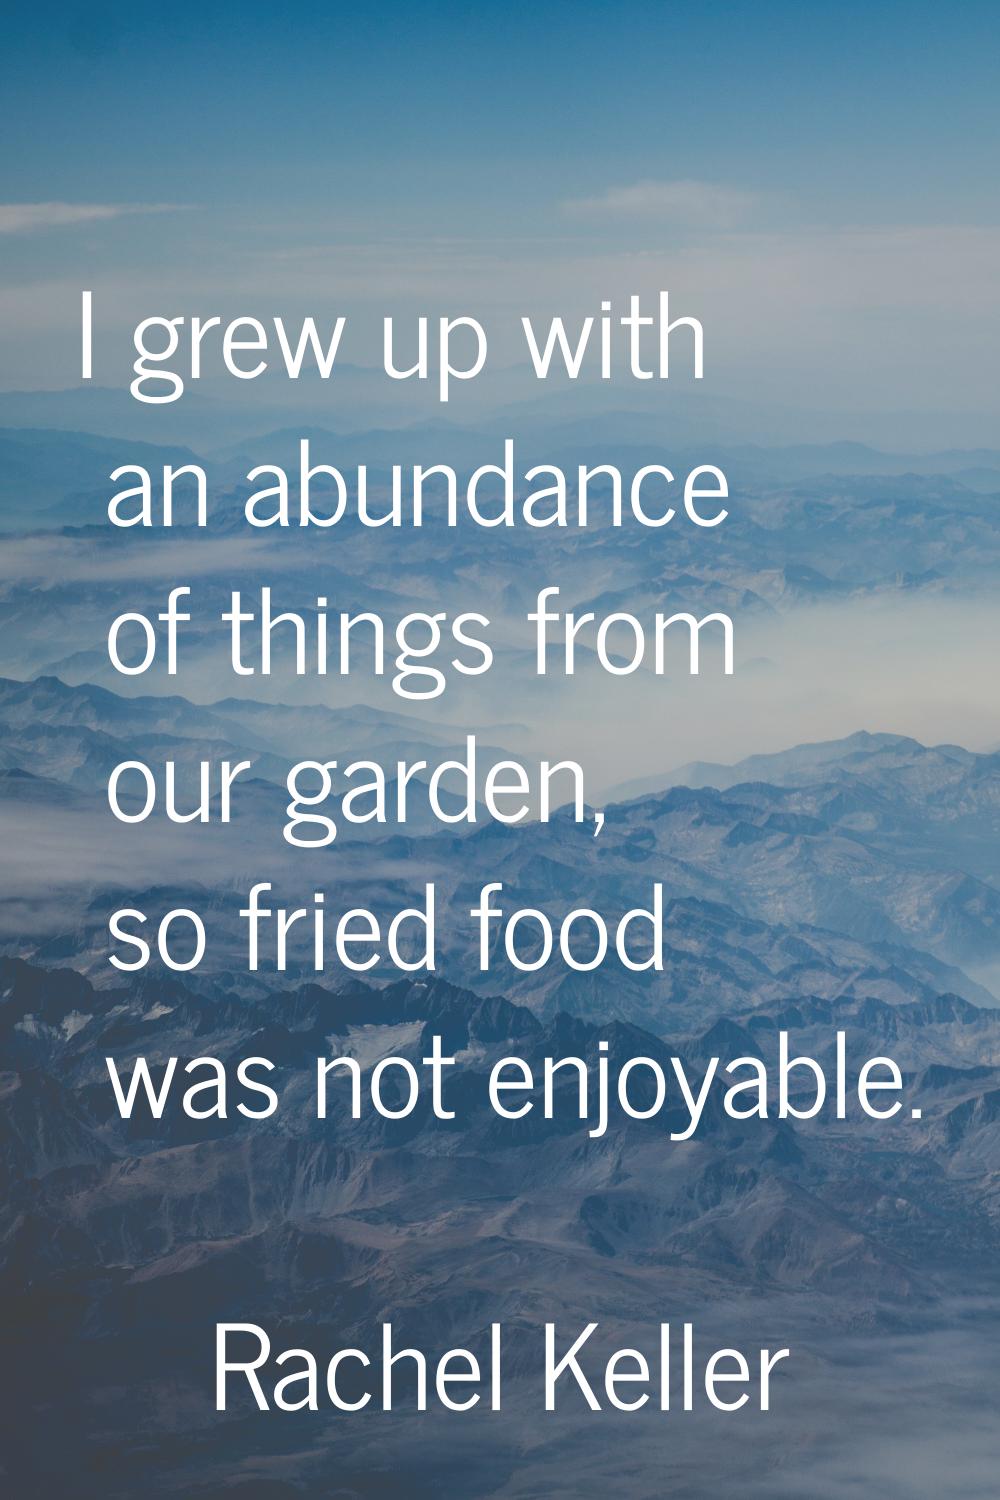 I grew up with an abundance of things from our garden, so fried food was not enjoyable.